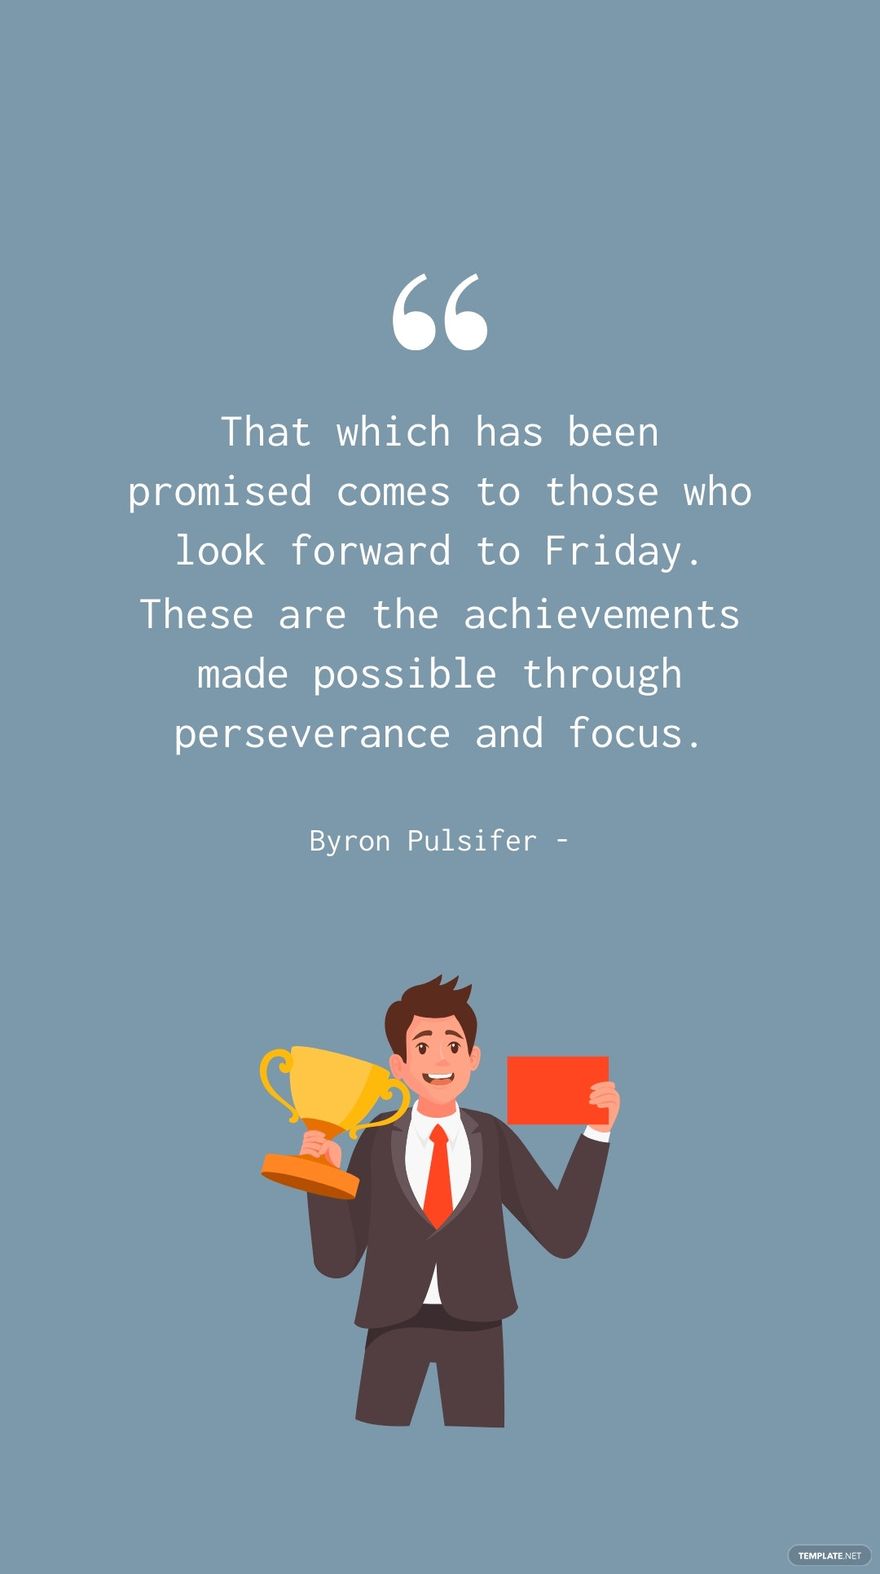 Byron Pulsifer - That which has been promised comes to those who look forward to Friday. These are the achievements made possible through perseverance and focus.